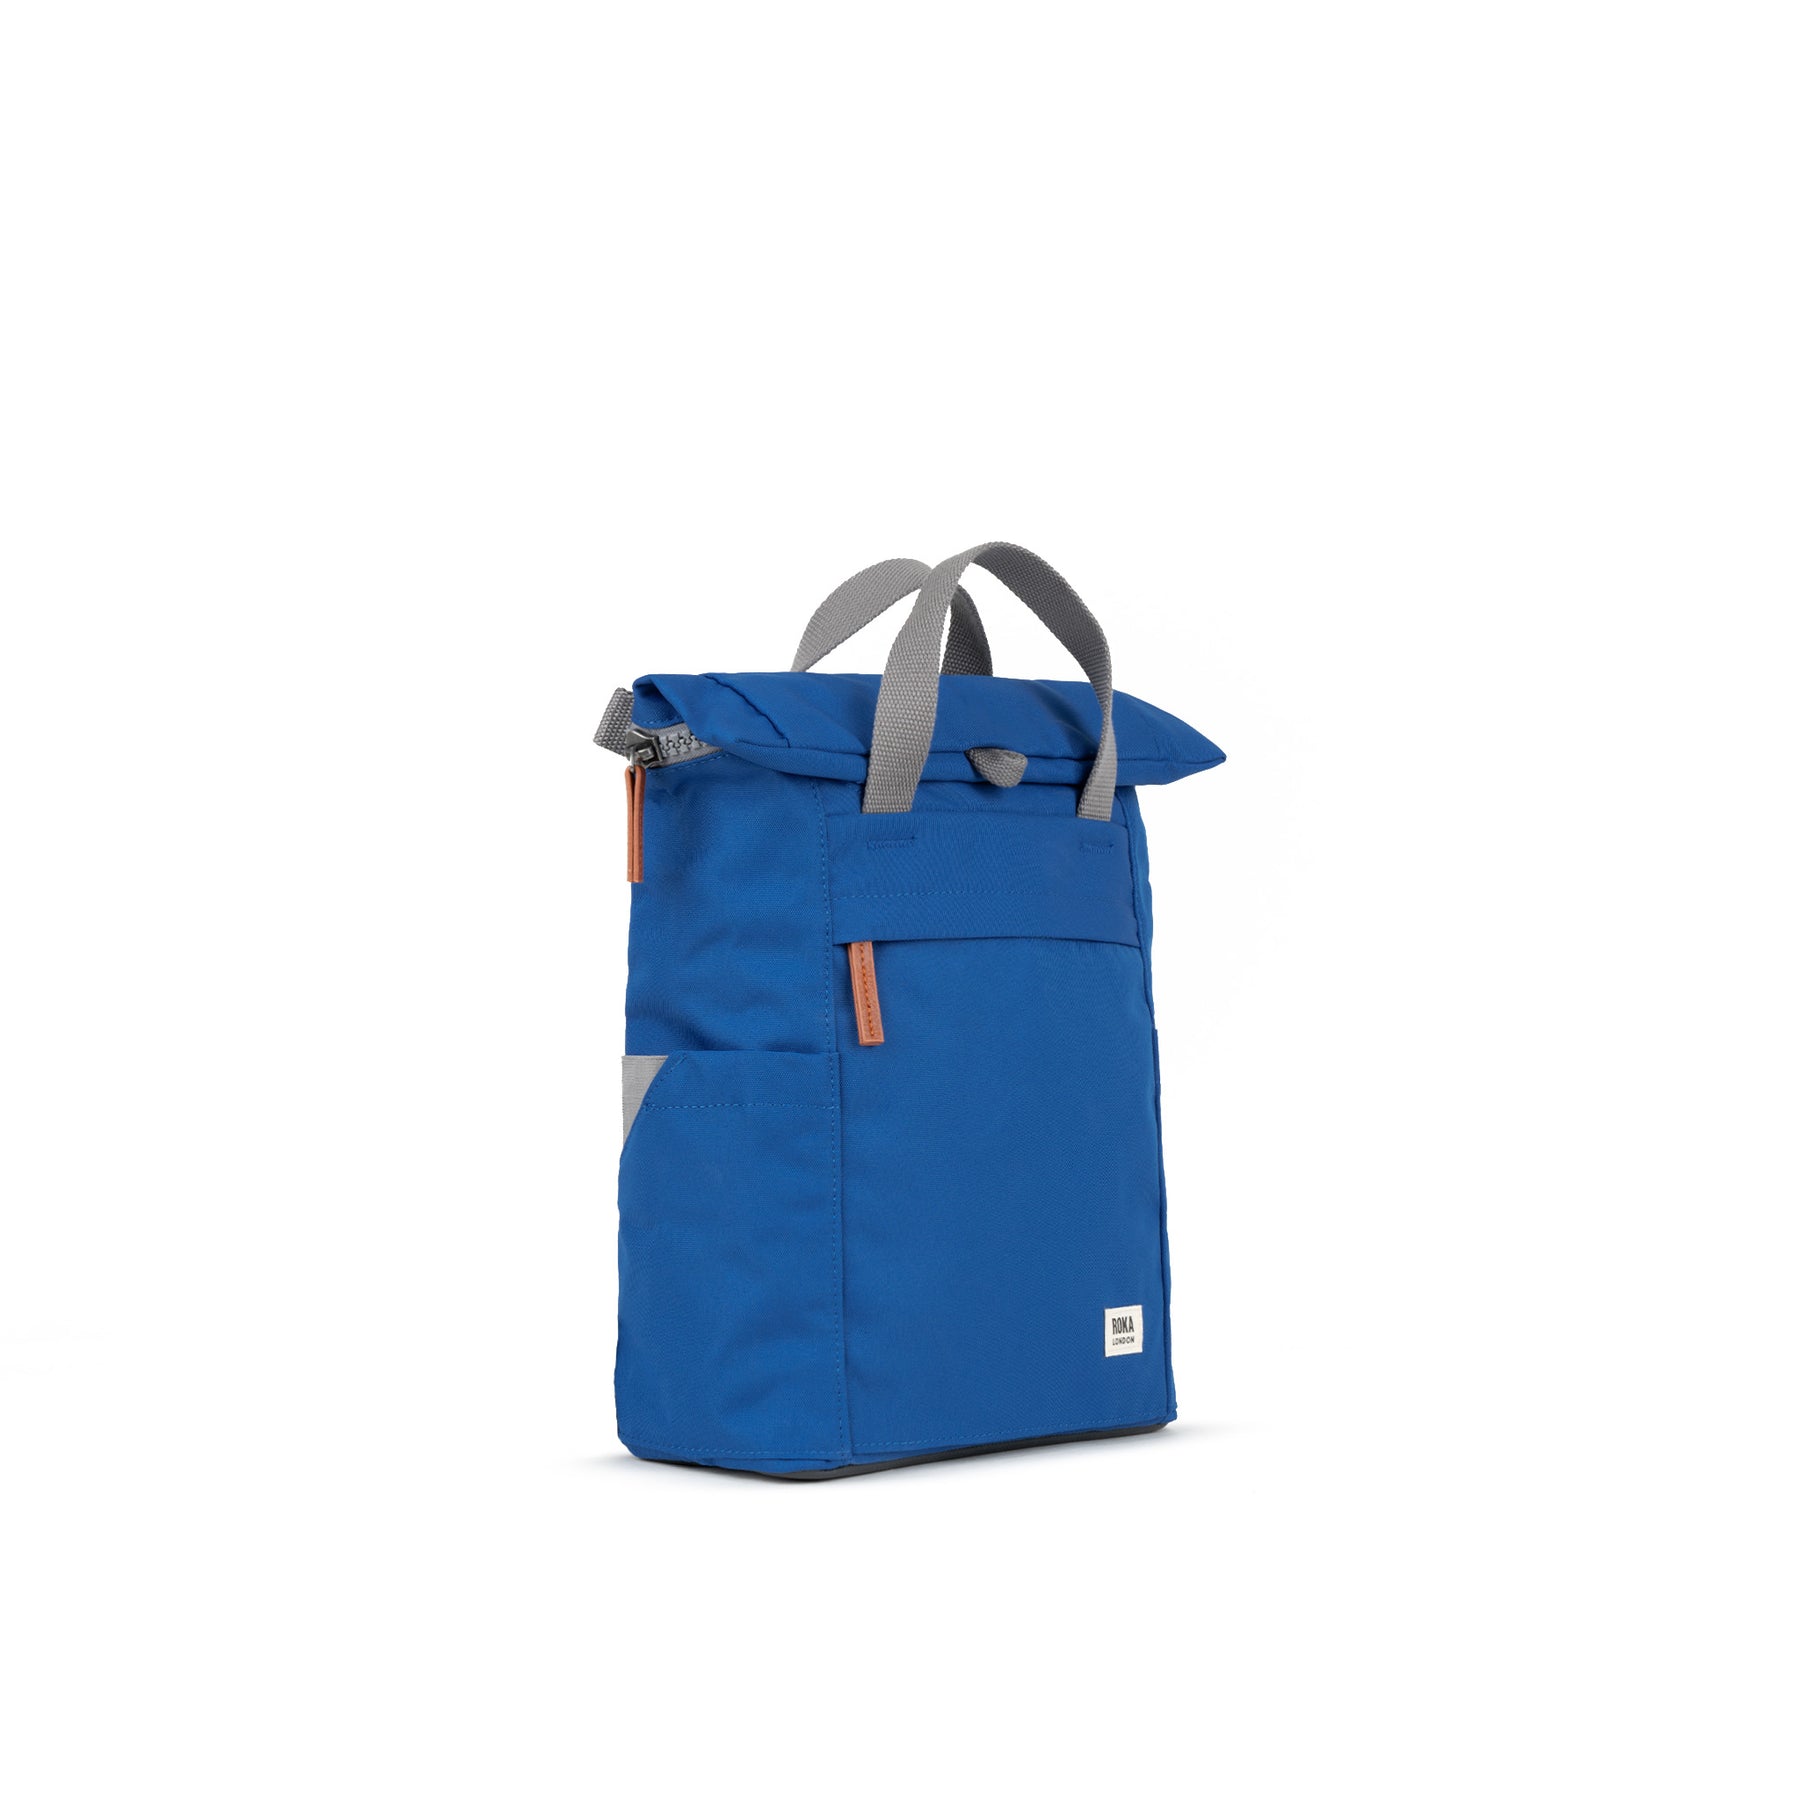 ROKA Finchley A Galactic Blue Small Recycled Canvas Bag